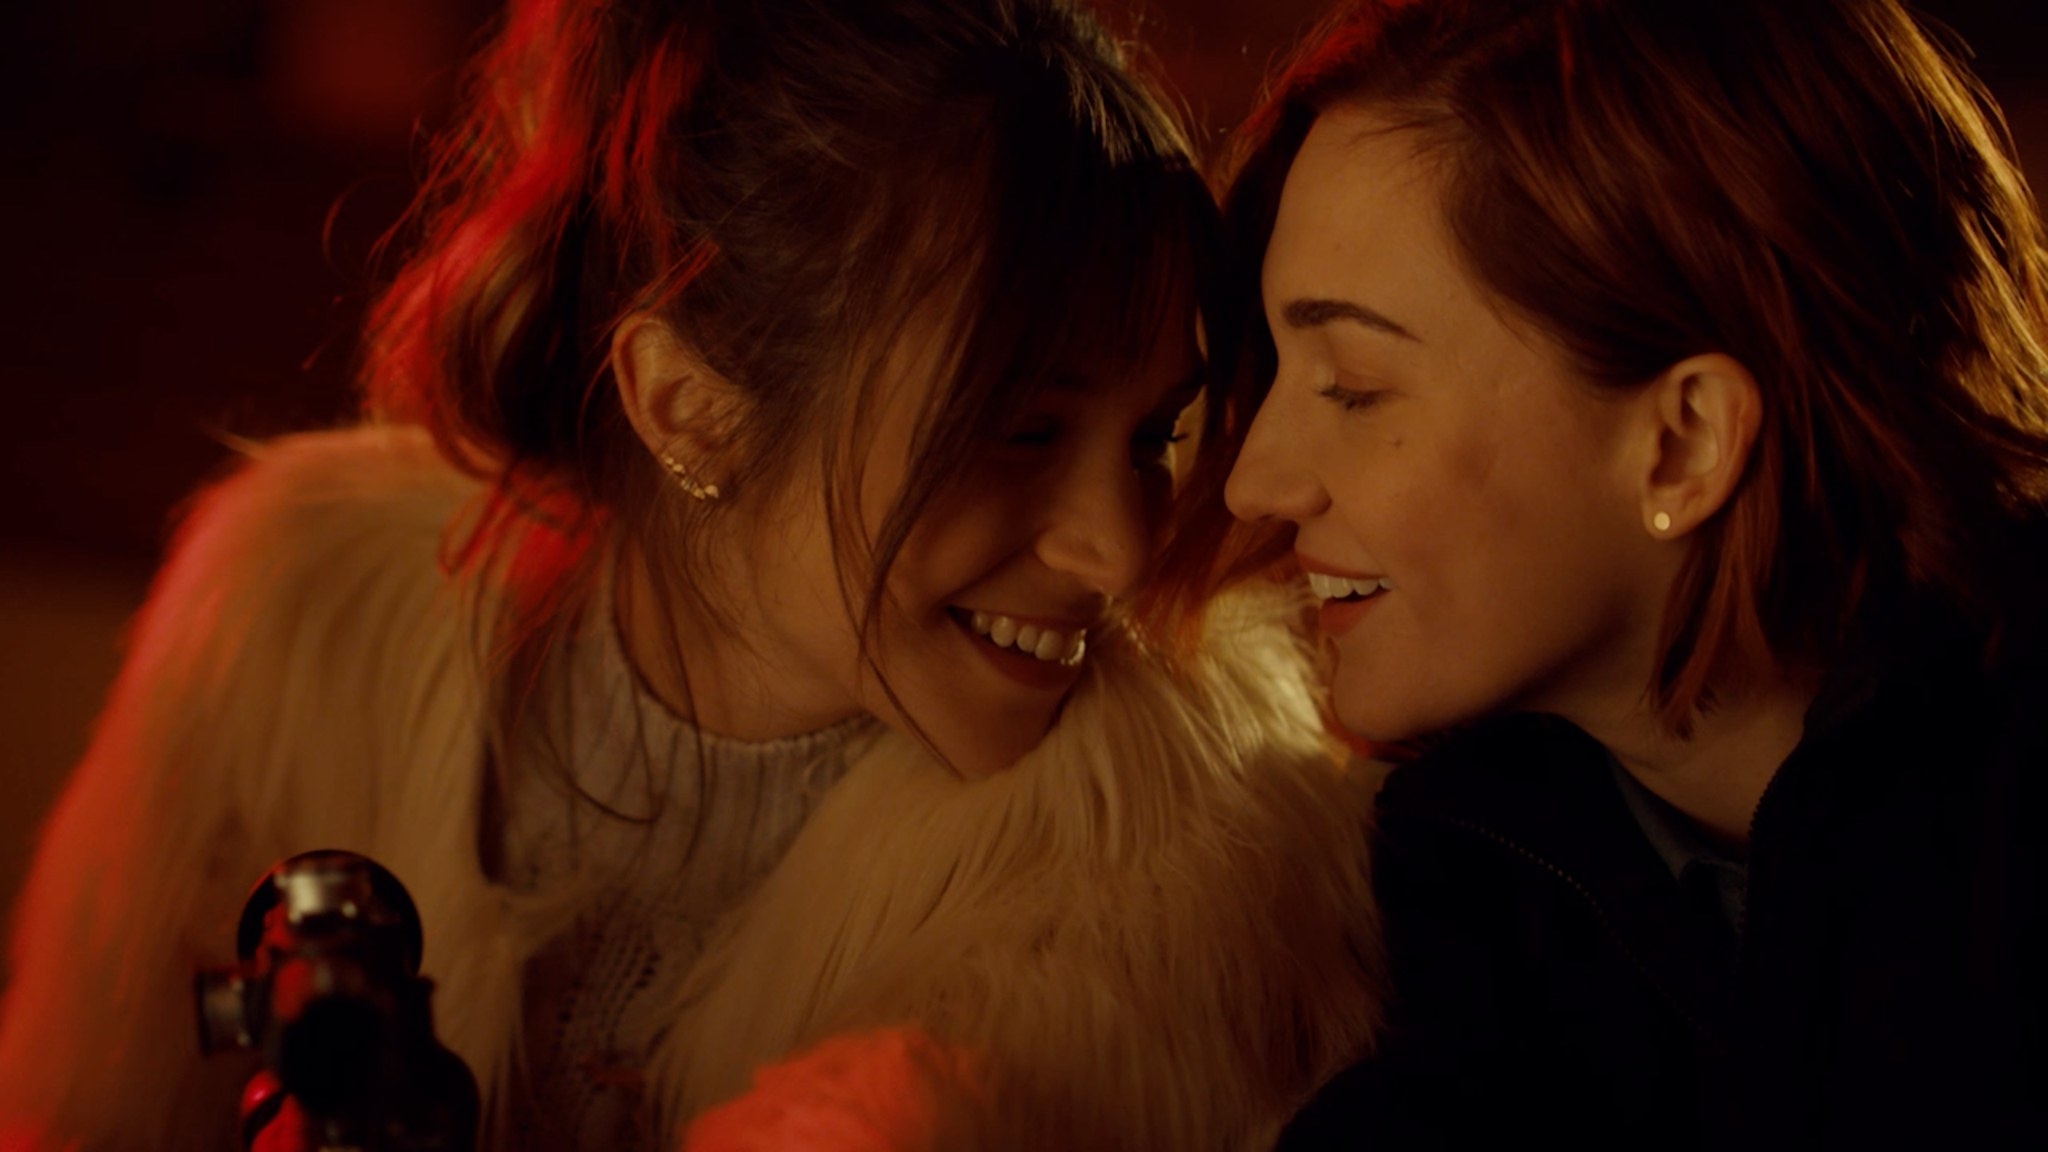 Girlfriends Waverly Earp and Nicole Haught flirt during a mission at the beginning of season 3